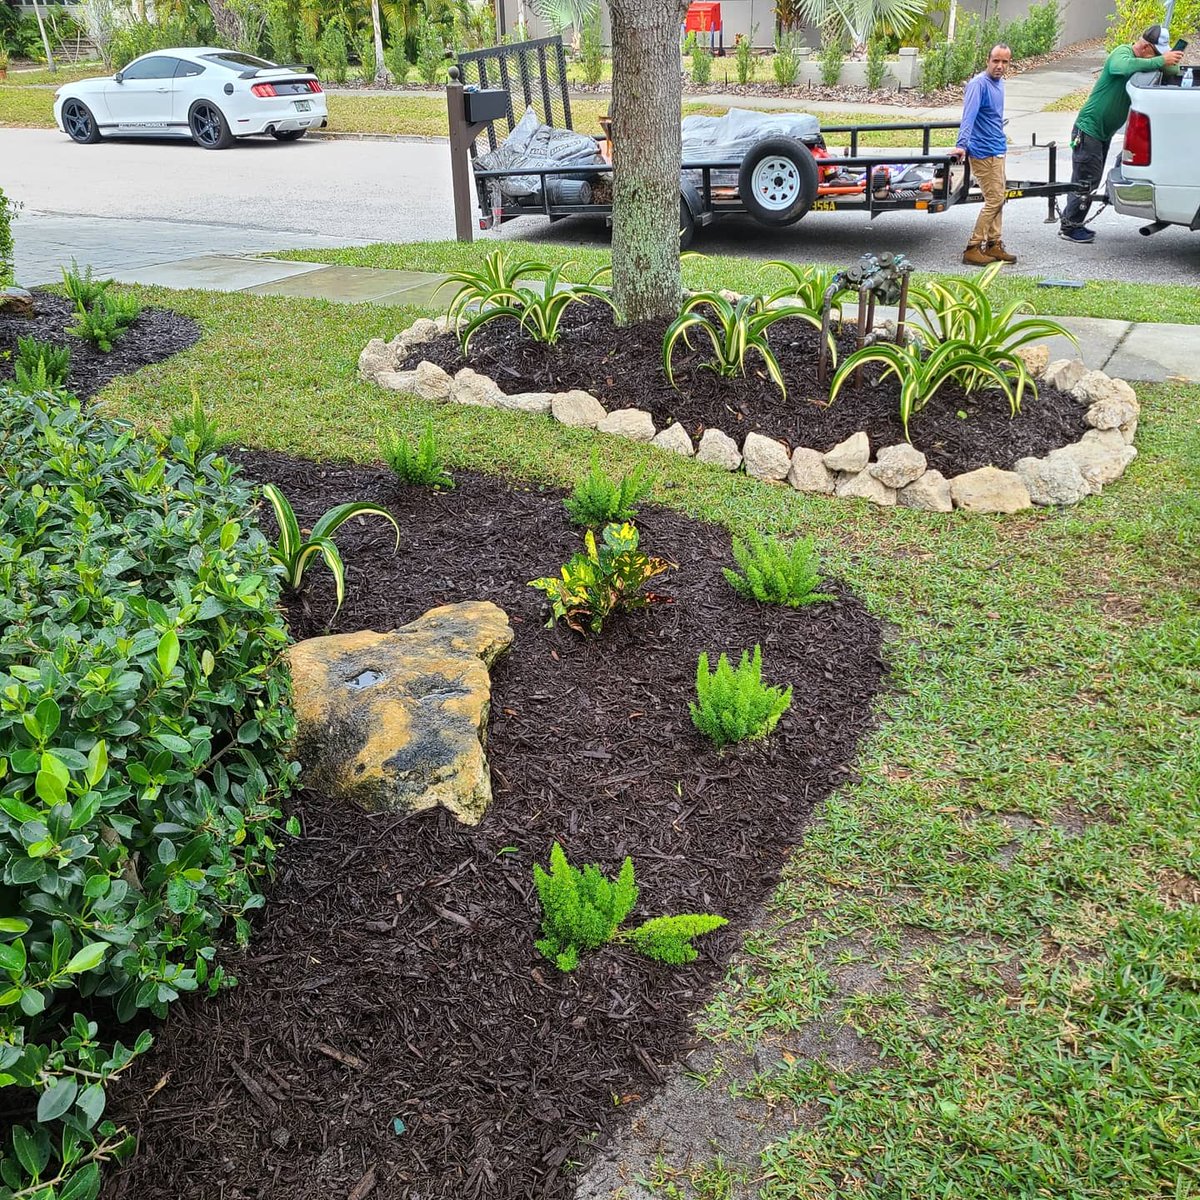 Another job well done by the crew today! If you are looking for landscaping services in the Sarasota area, give us a call! #sarasotafl #sarasotasmallbusiness #landscaping